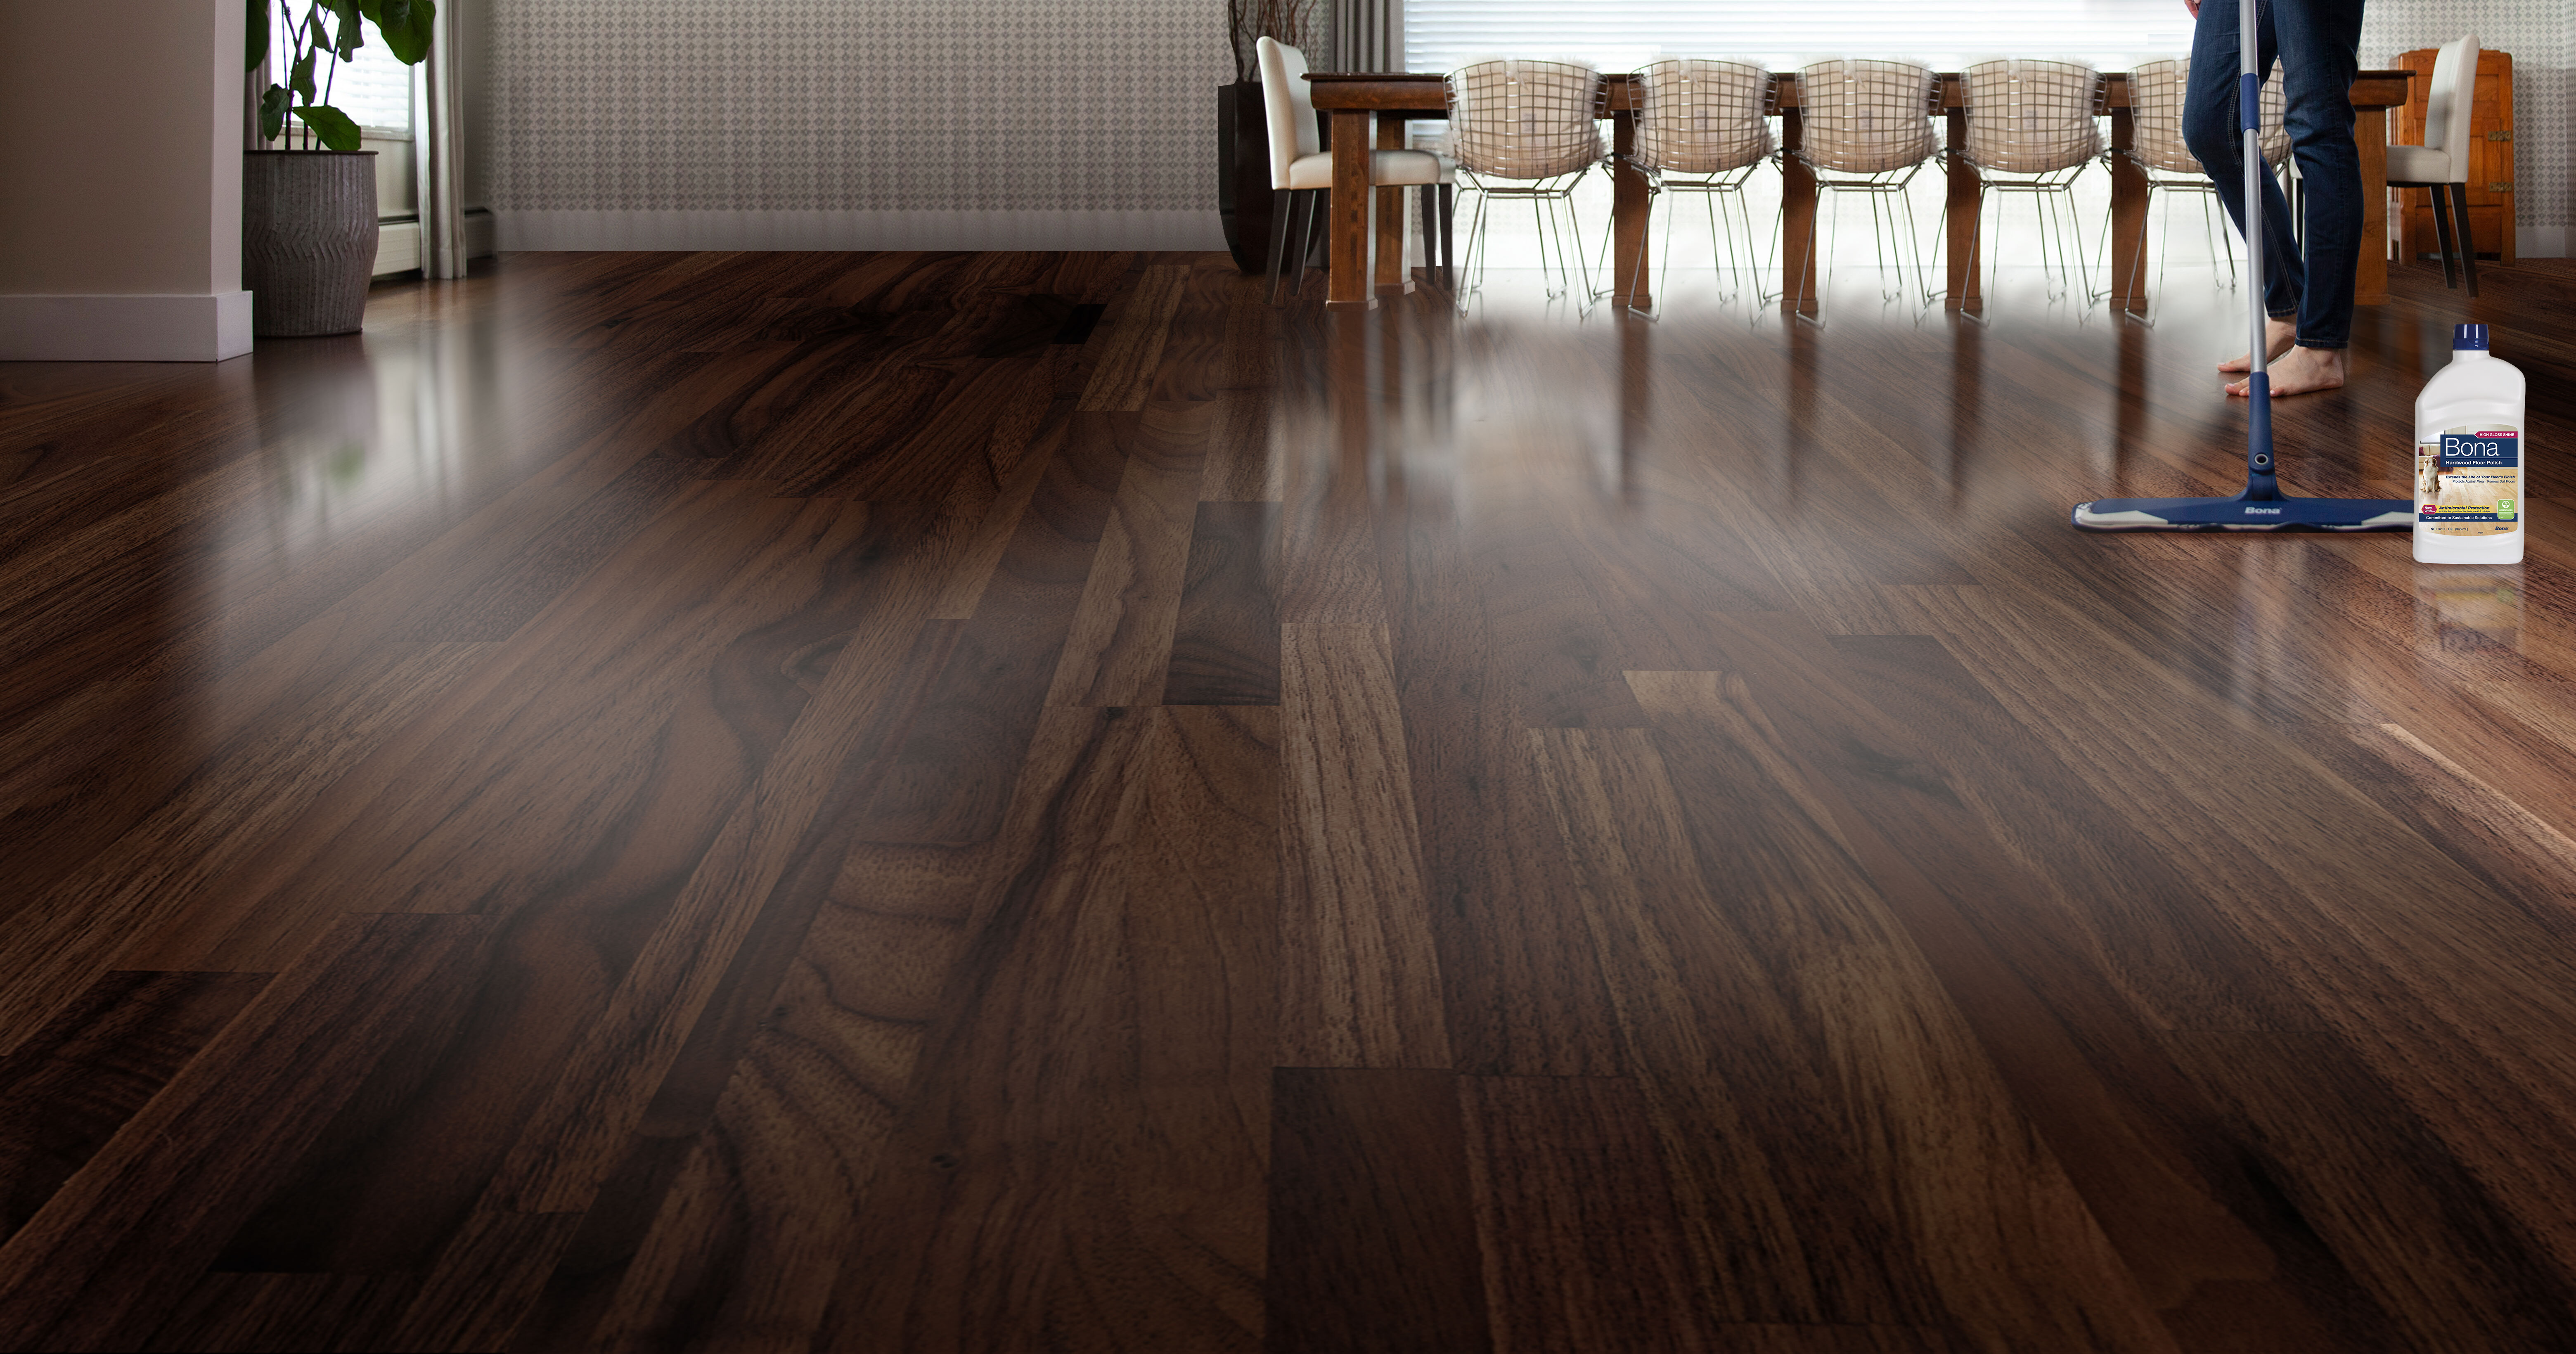 How To Polish Hardwood Floors Do S And, How To Remove Bona Polish From Hardwood Floors